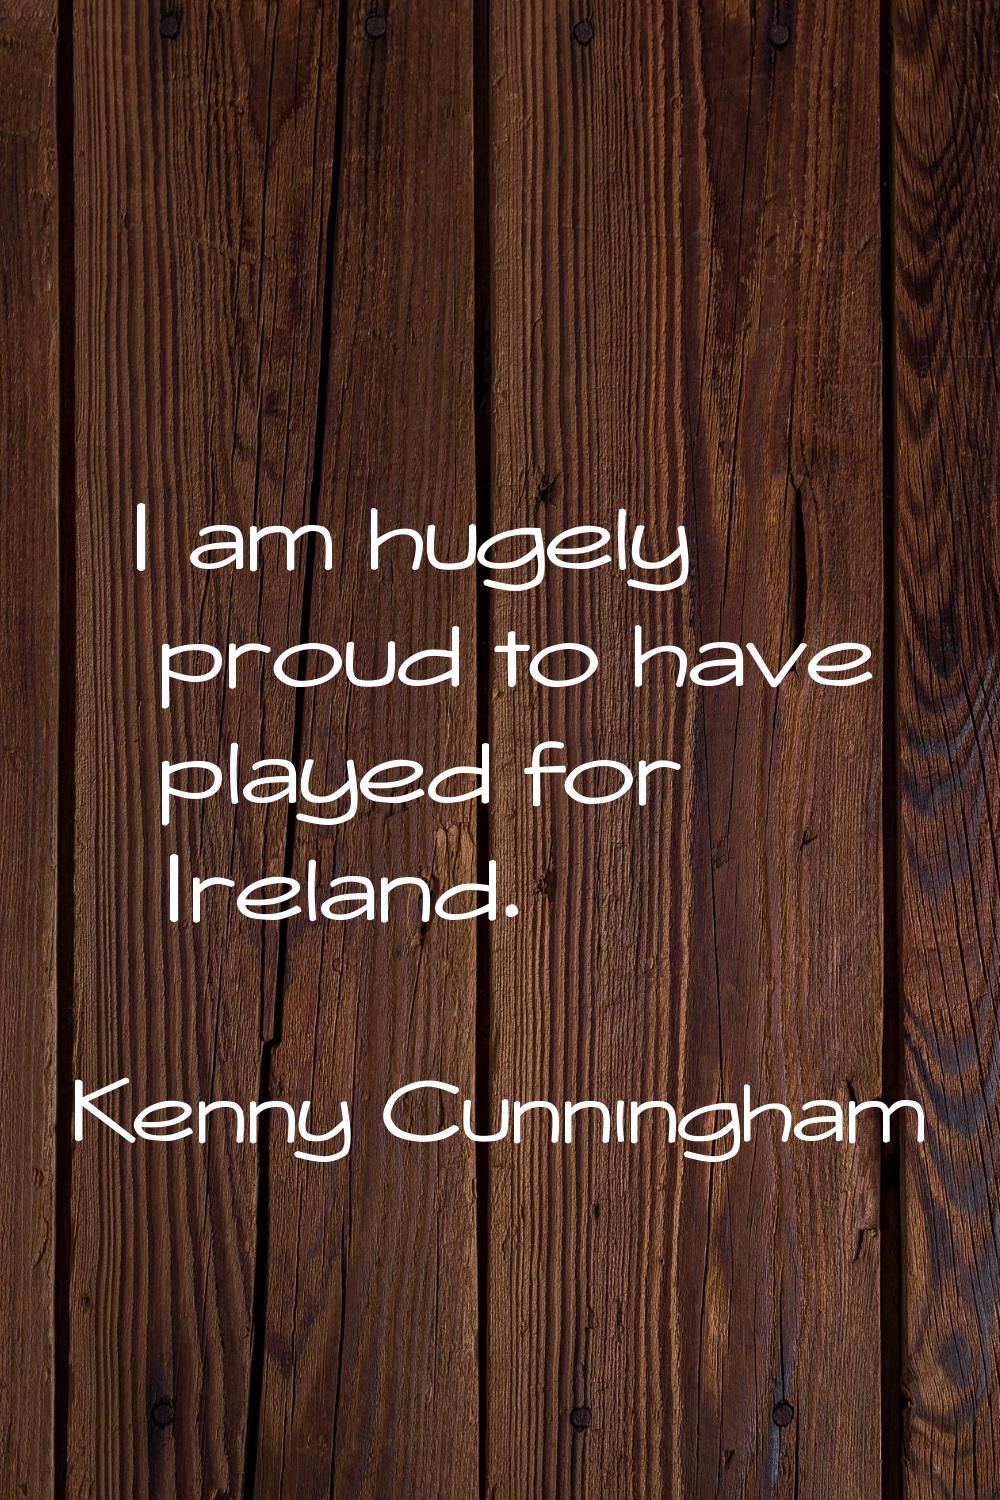 I am hugely proud to have played for Ireland.